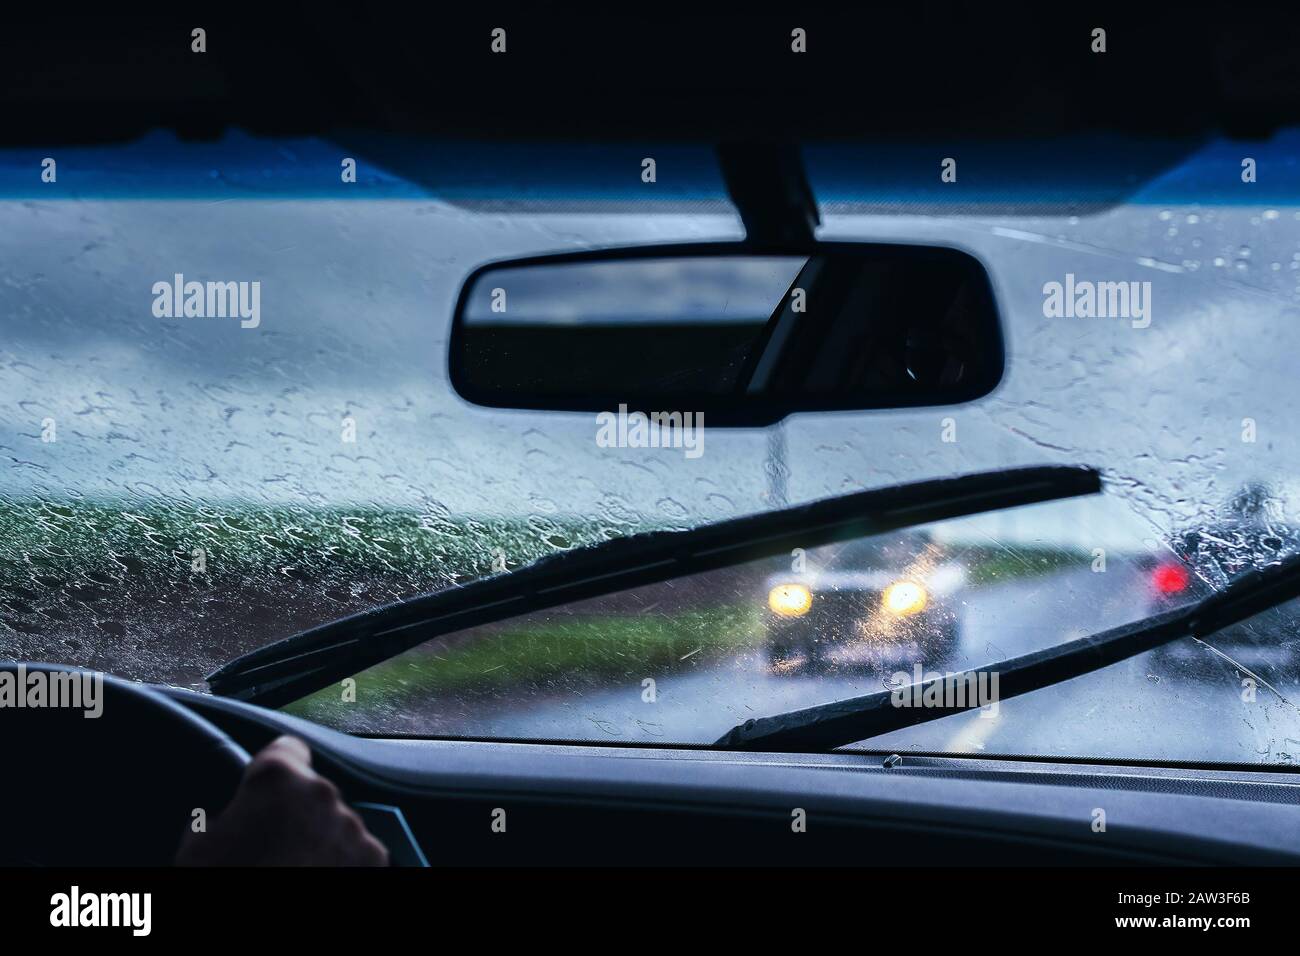 Driving carefully a car on the road on a rainy day, traffic of cars on the road. Windshield of a car wet by the rain, wiper blades cleaning the front Stock Photo